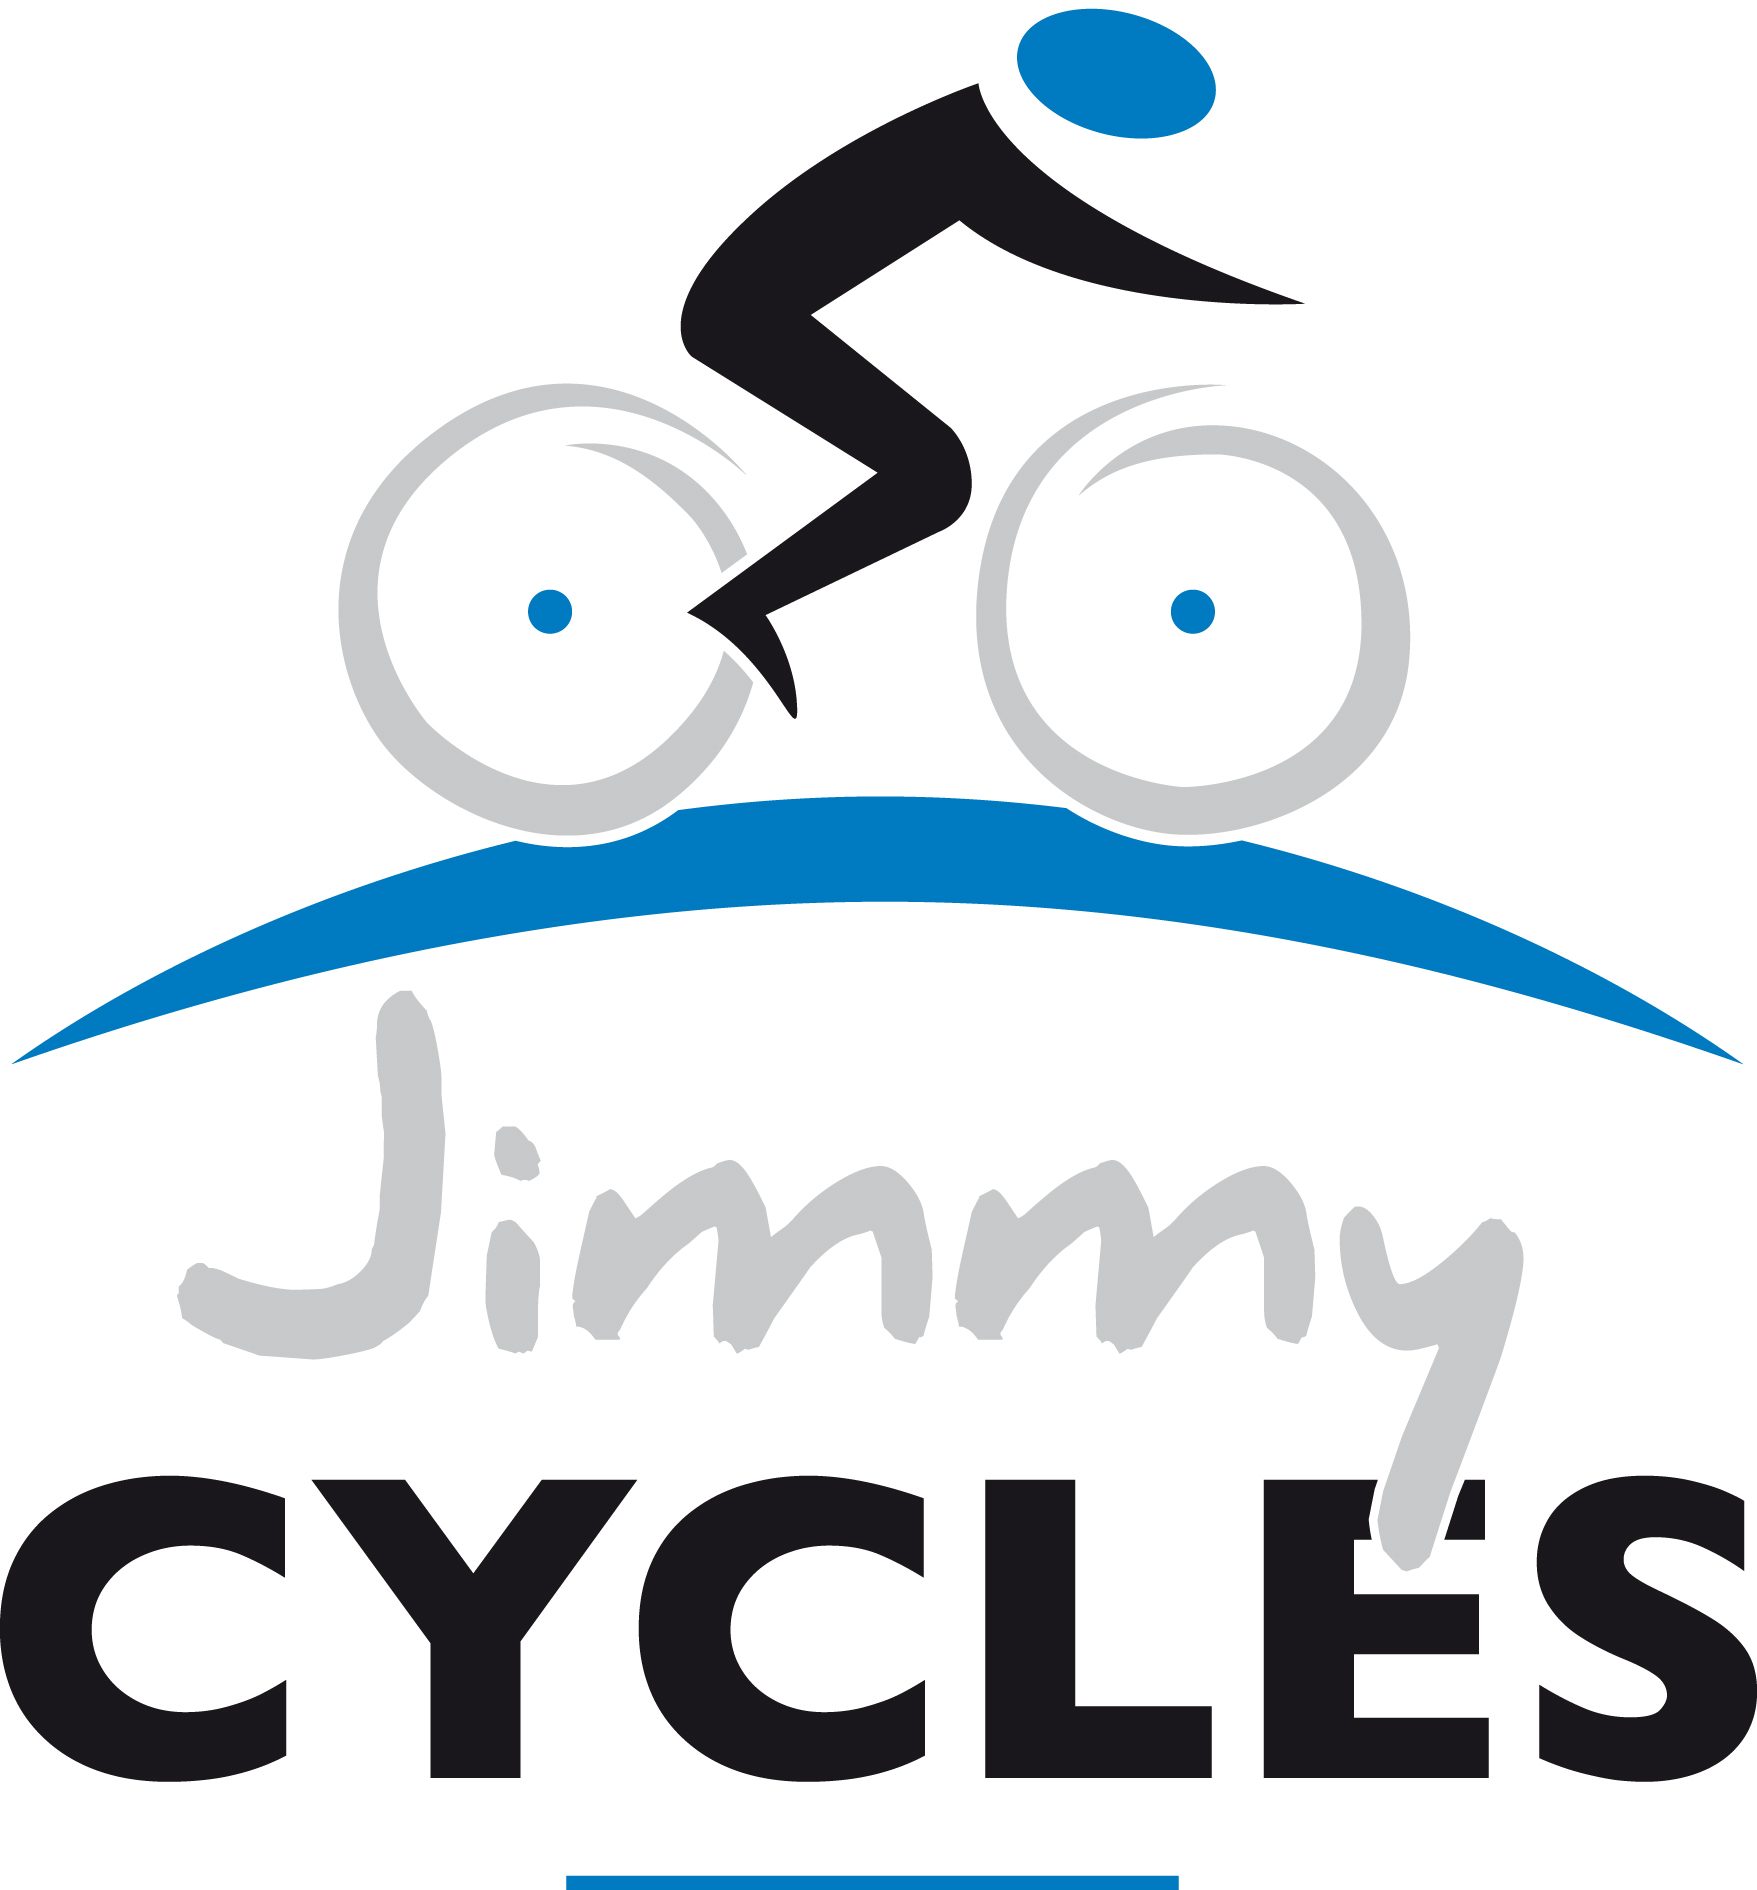 Jimmy Cycles